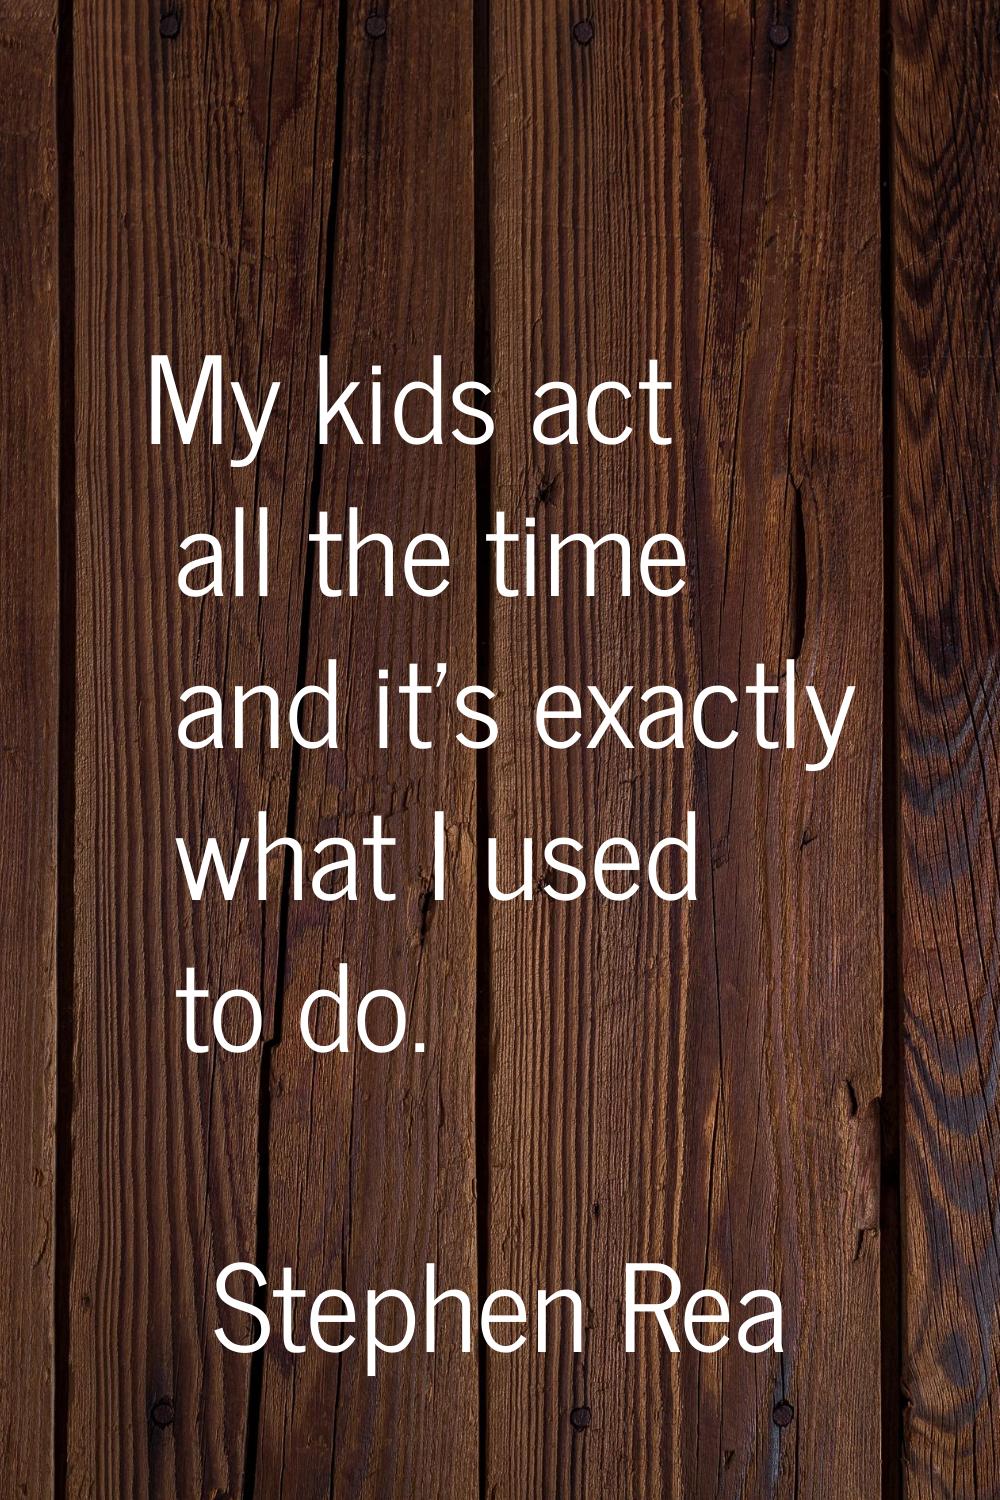 My kids act all the time and it's exactly what I used to do.